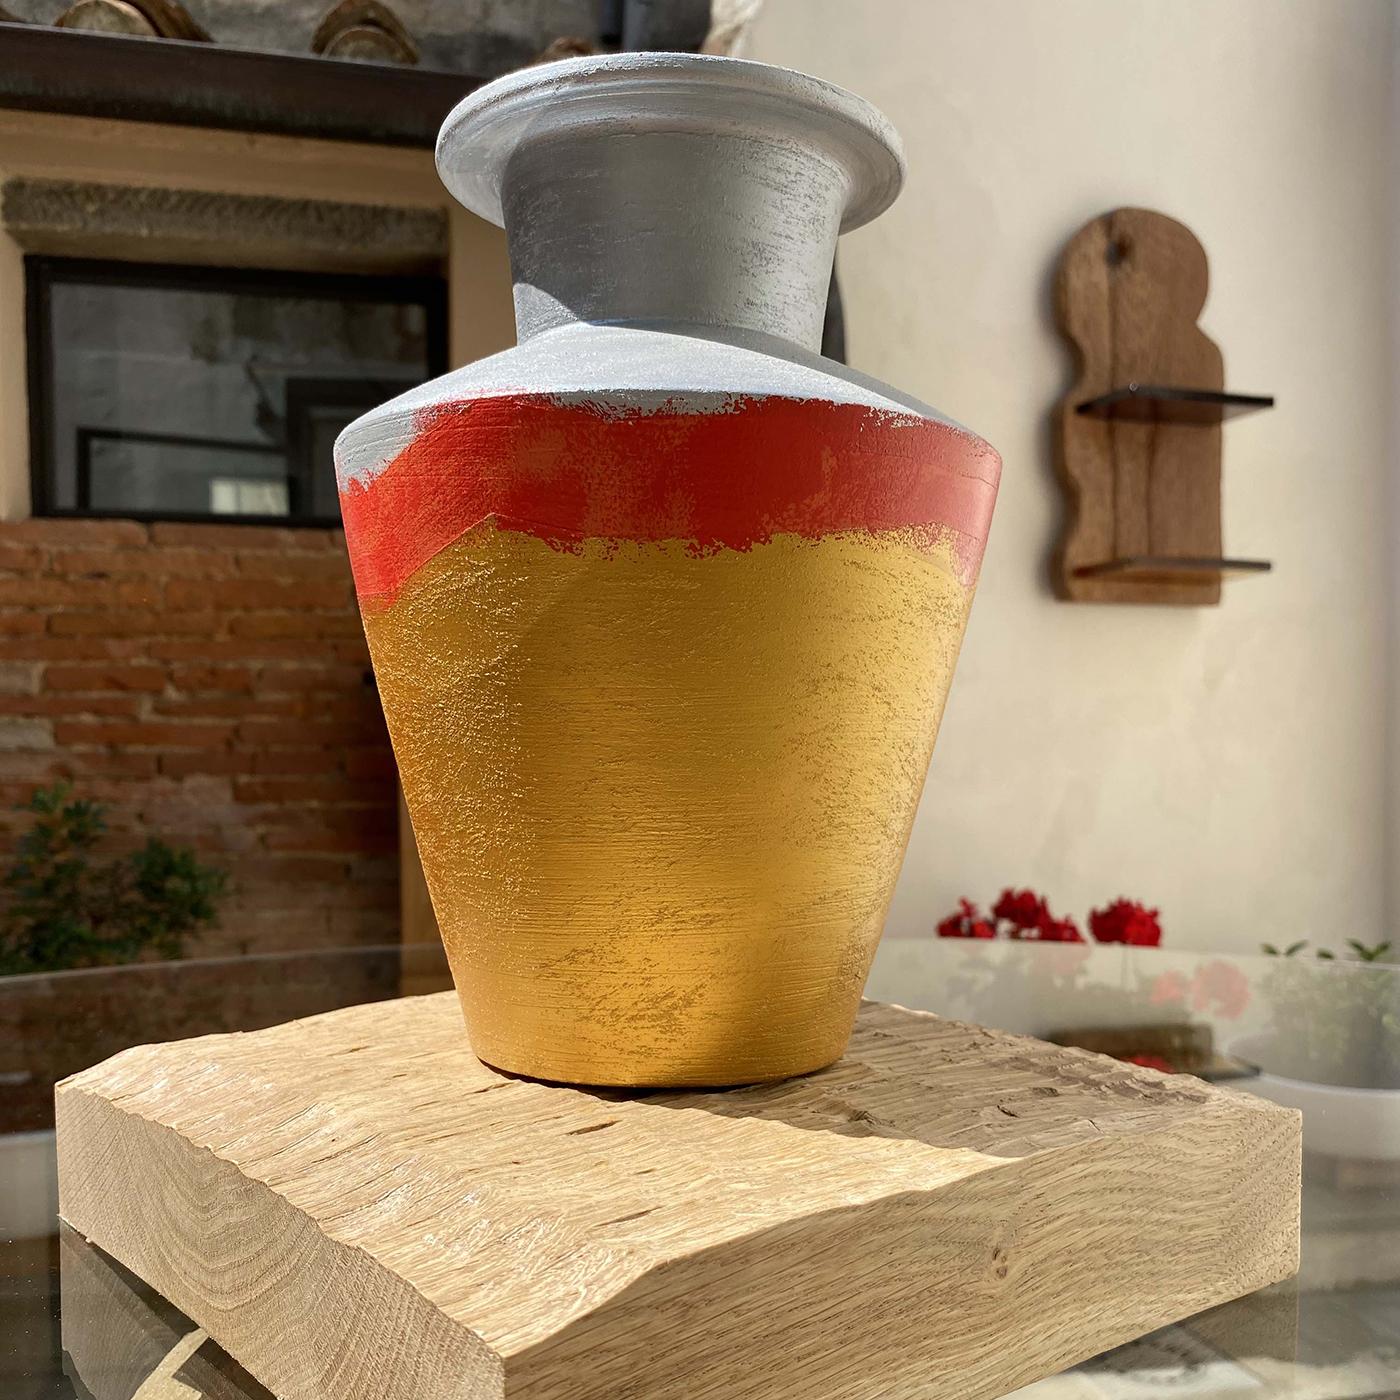 The Calafuria Cinque vase by Mascia Meccani is hand-turned and hand painted, bringing a rustic touch to any interior. Its biscuit terracotta silhouette is beautifully hand painted, boasting a gold base and gray top, and accented with a fiery red